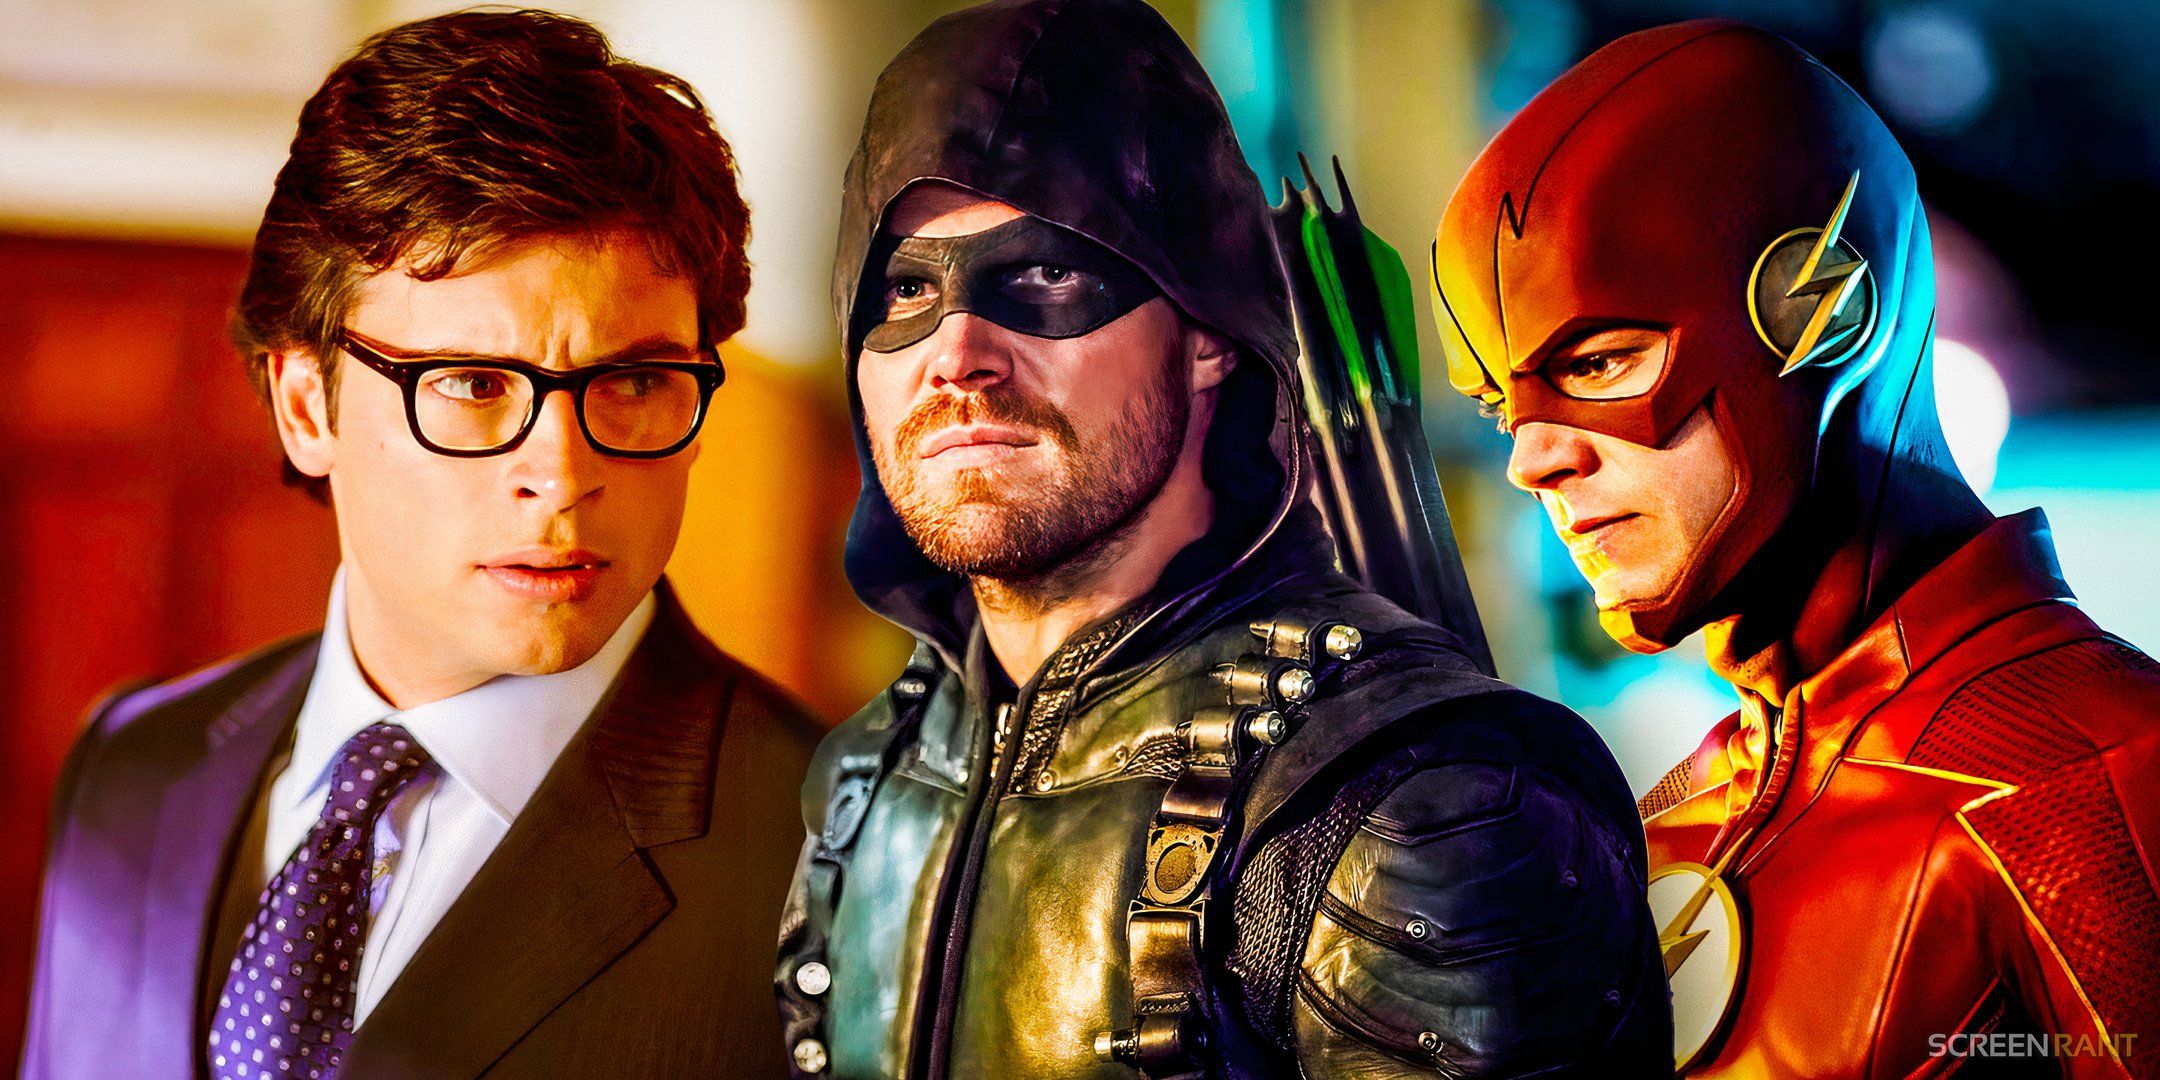 Tom Welling's Clark Kent from Smallville with glasses next to Stephen Amell's Green Arrow and Grant Gustin's The Flash from the Arrowverse